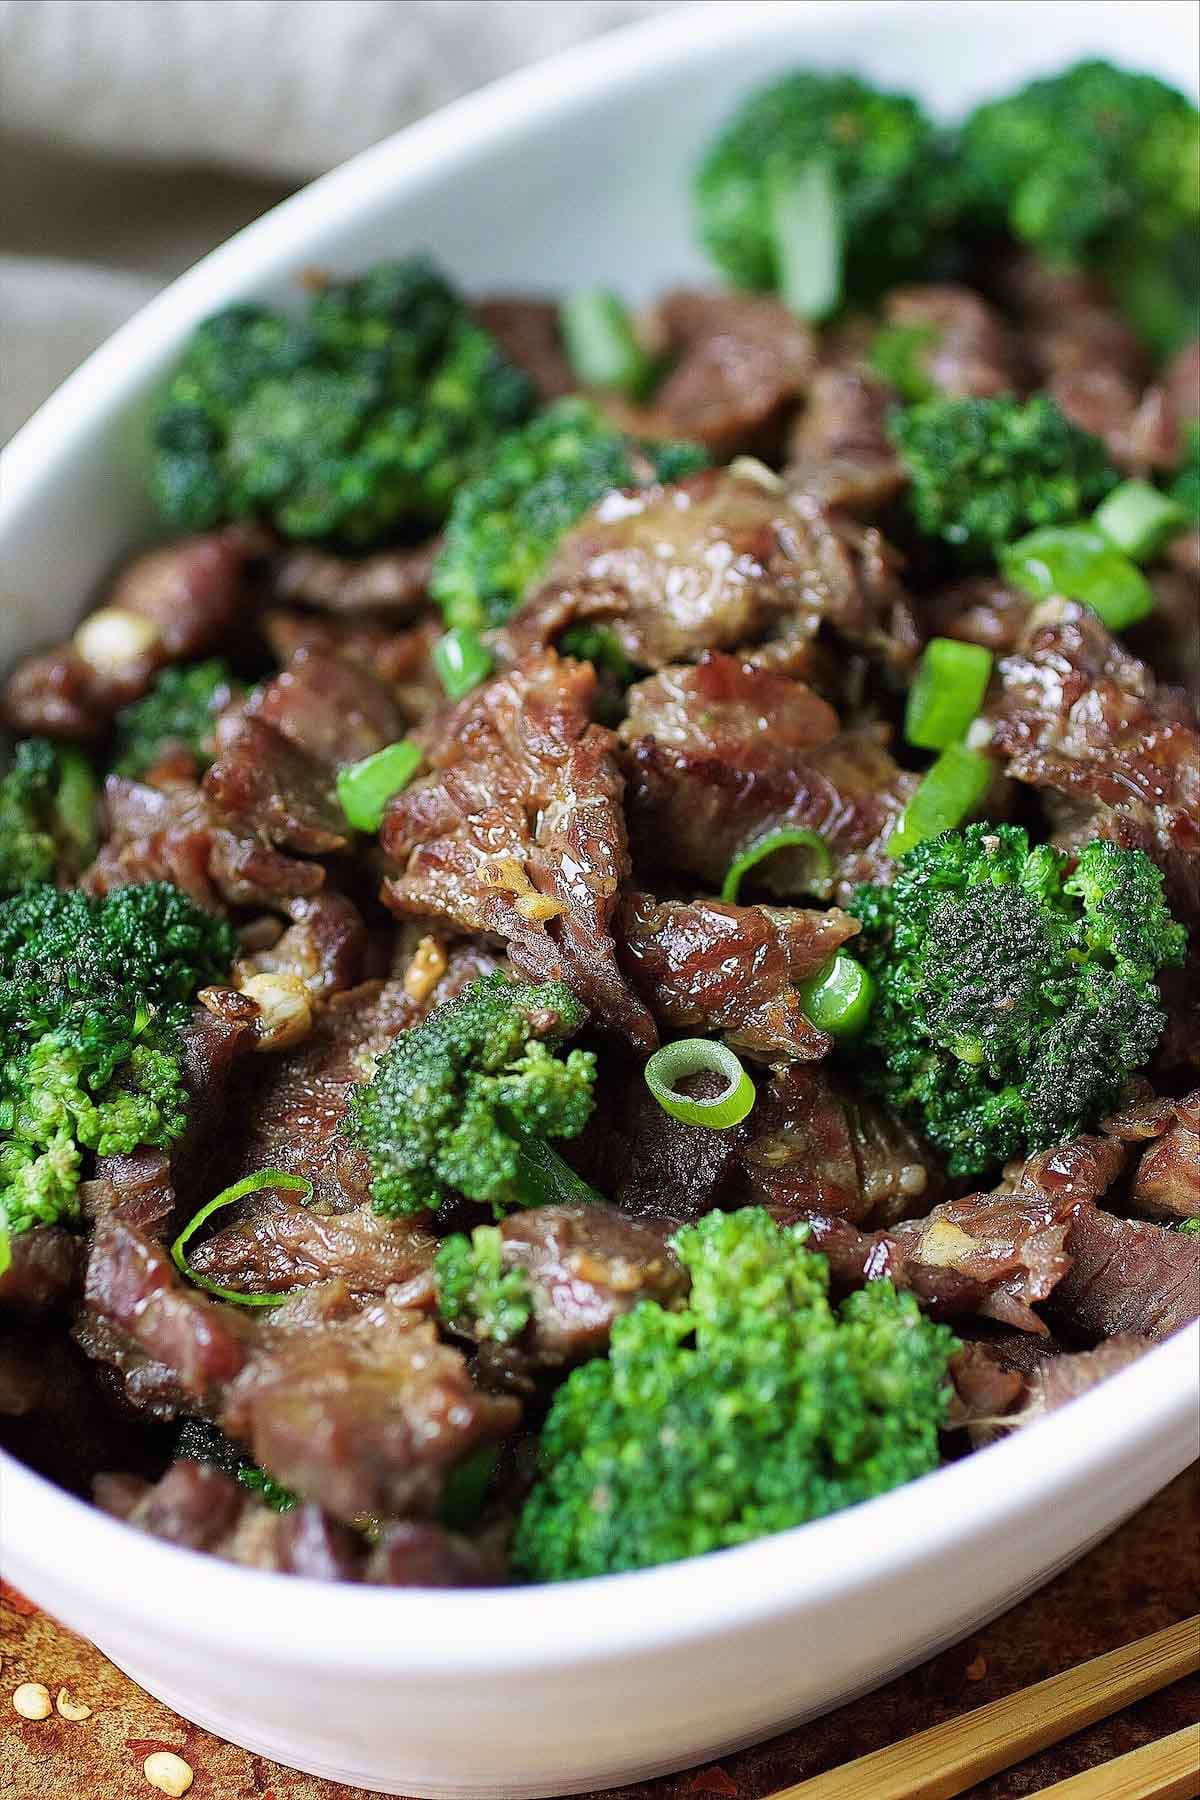 Image shows velveted beef stir fried with crisp broccoli and served in a white color plate.